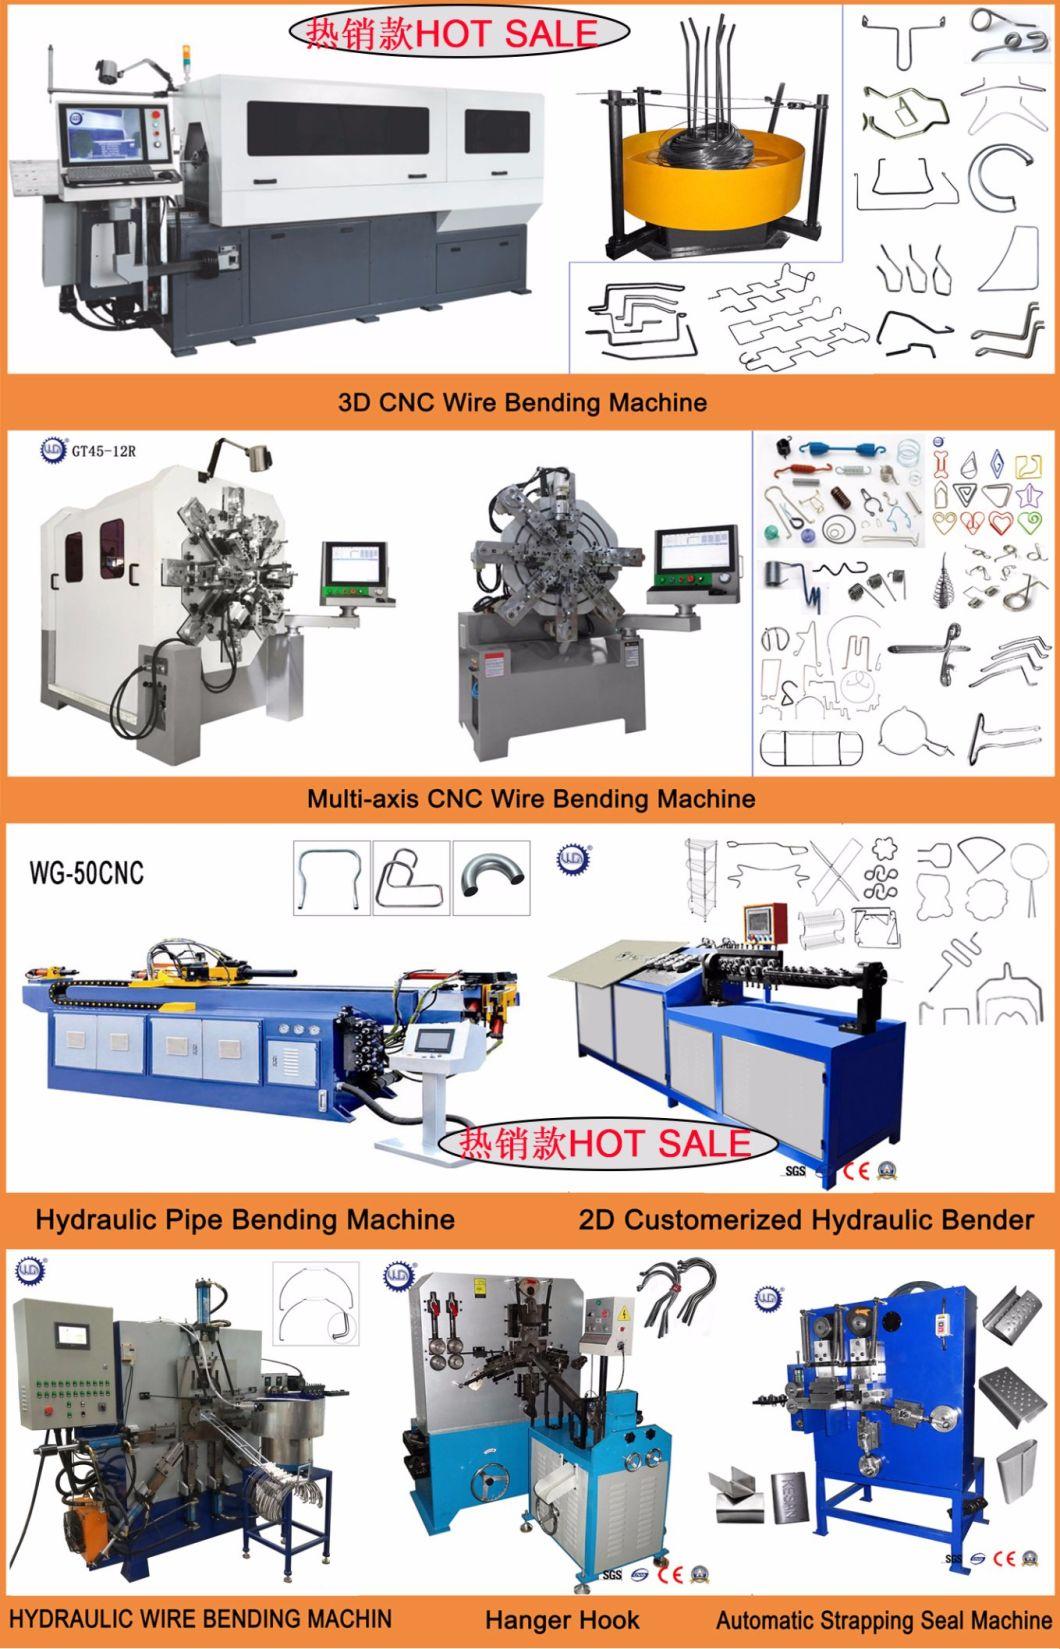 ISO 9001: 2008 Approved New Wg Bending 3D CNC Wire Forming Machine